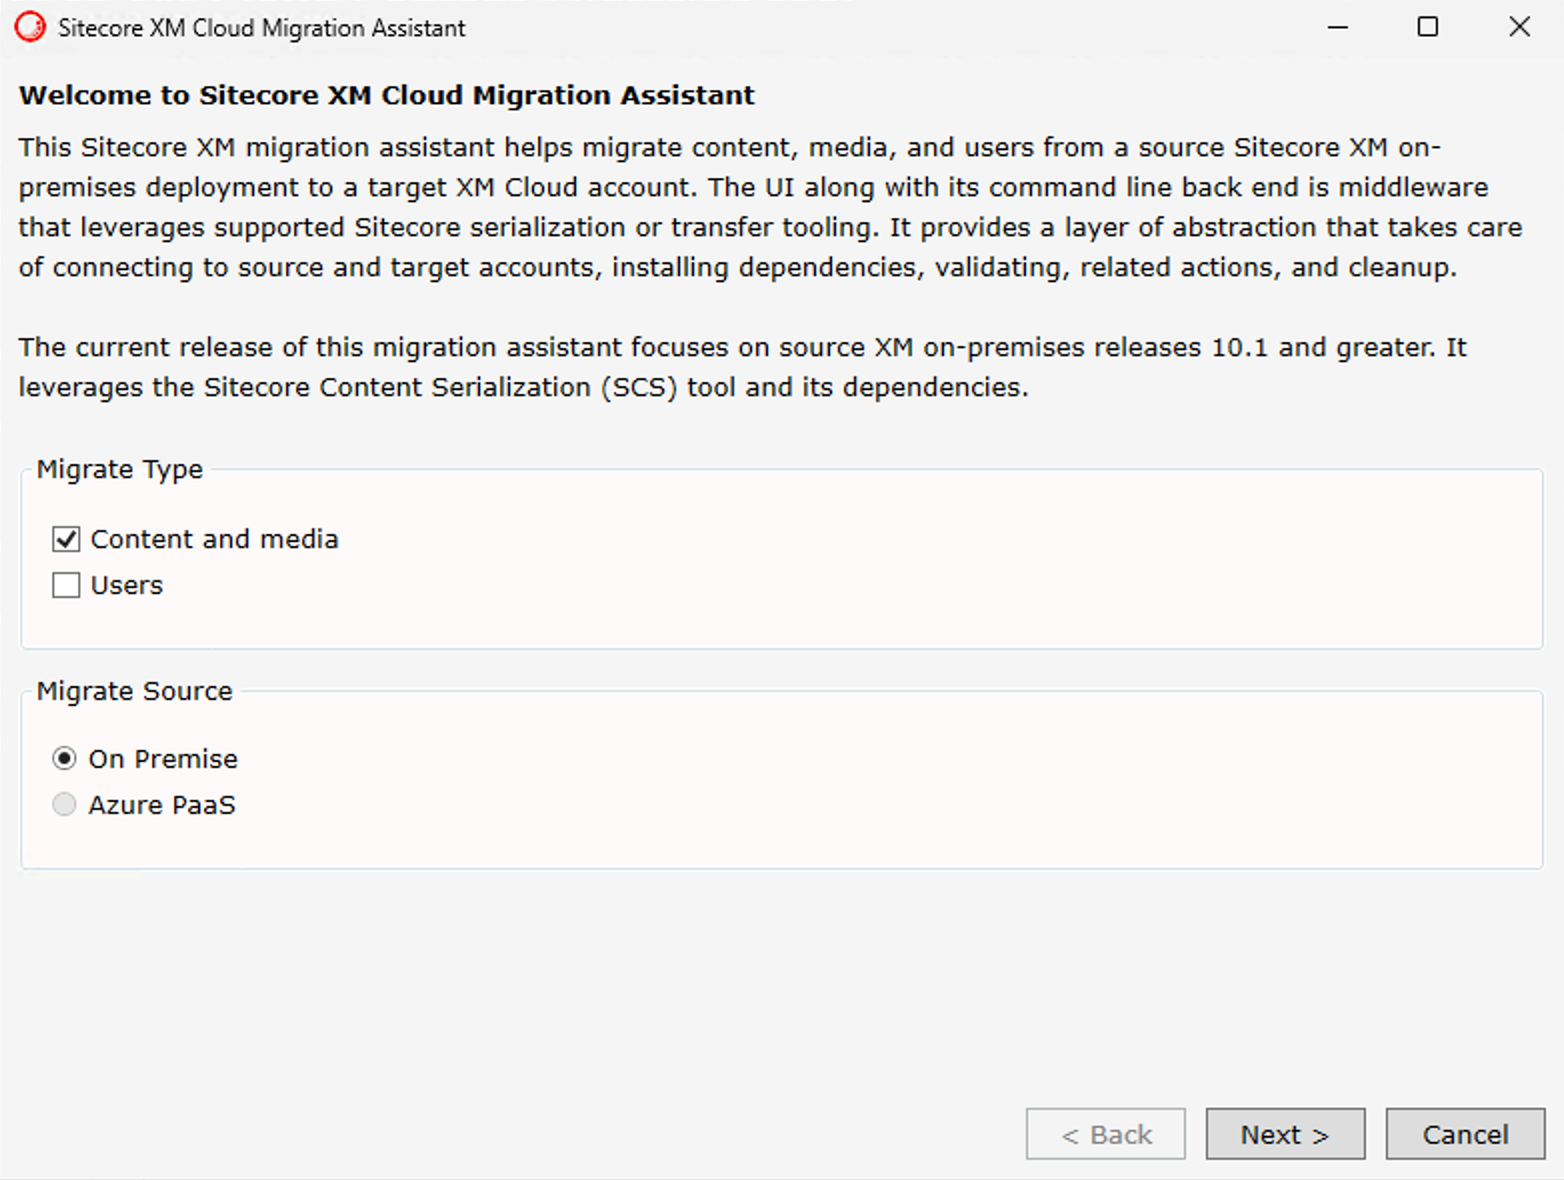 Welcome screen of the Sitecore XM Cloud Migration Assistant detailing options for content, media, and user migration.